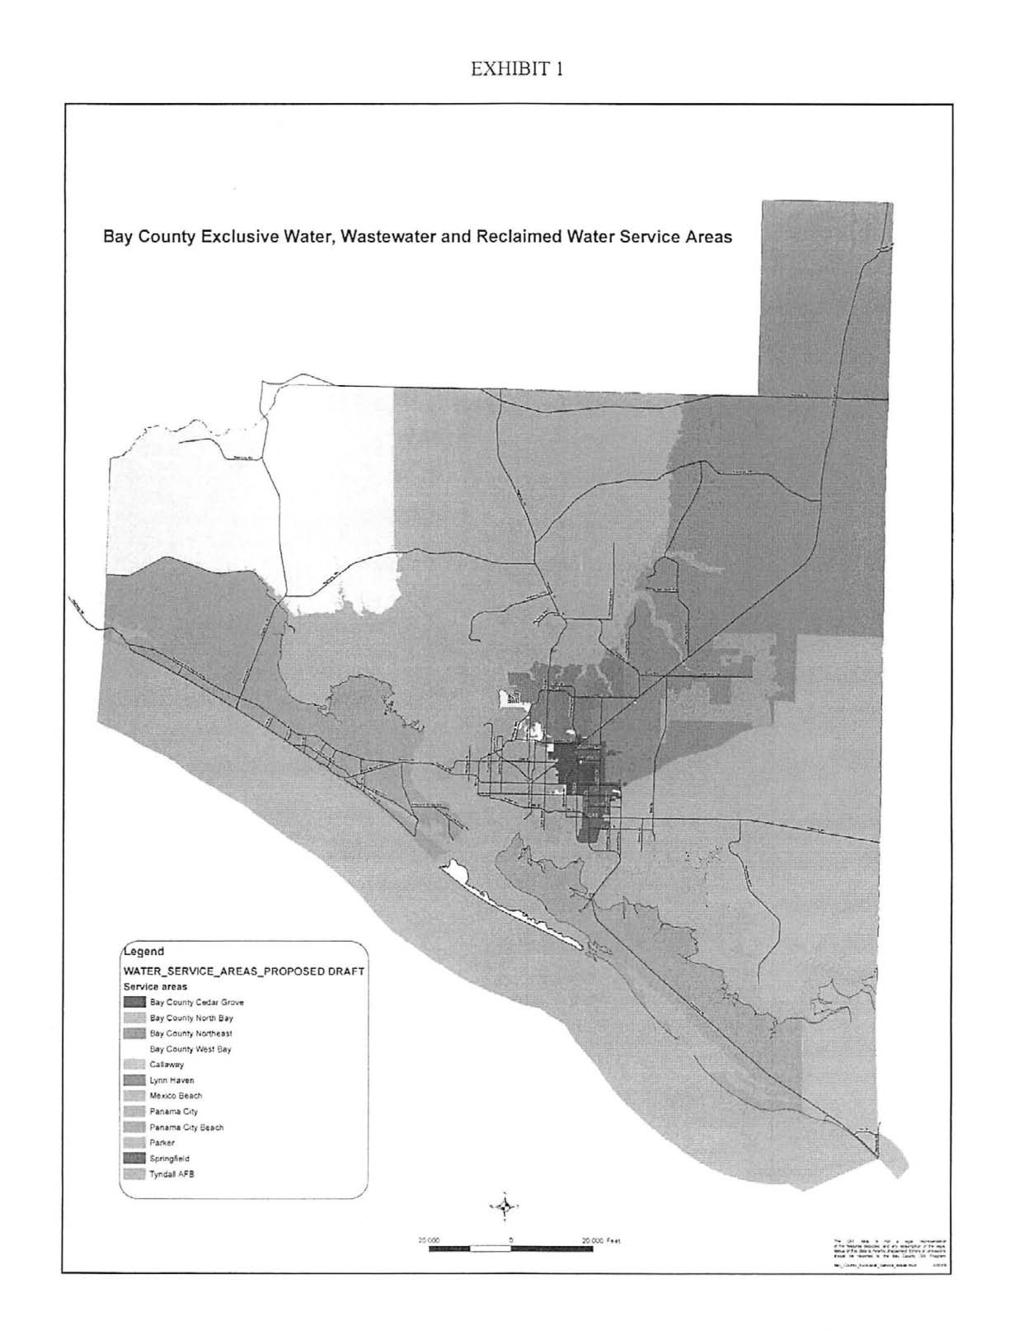 EXHIBIT 1 Bay County Exclusive Water, Wastewater and Reclaimed Water Service Areas WATER_SERVICE_AREAS_PROPOSEO DRAFT Ssrvtce areas Say